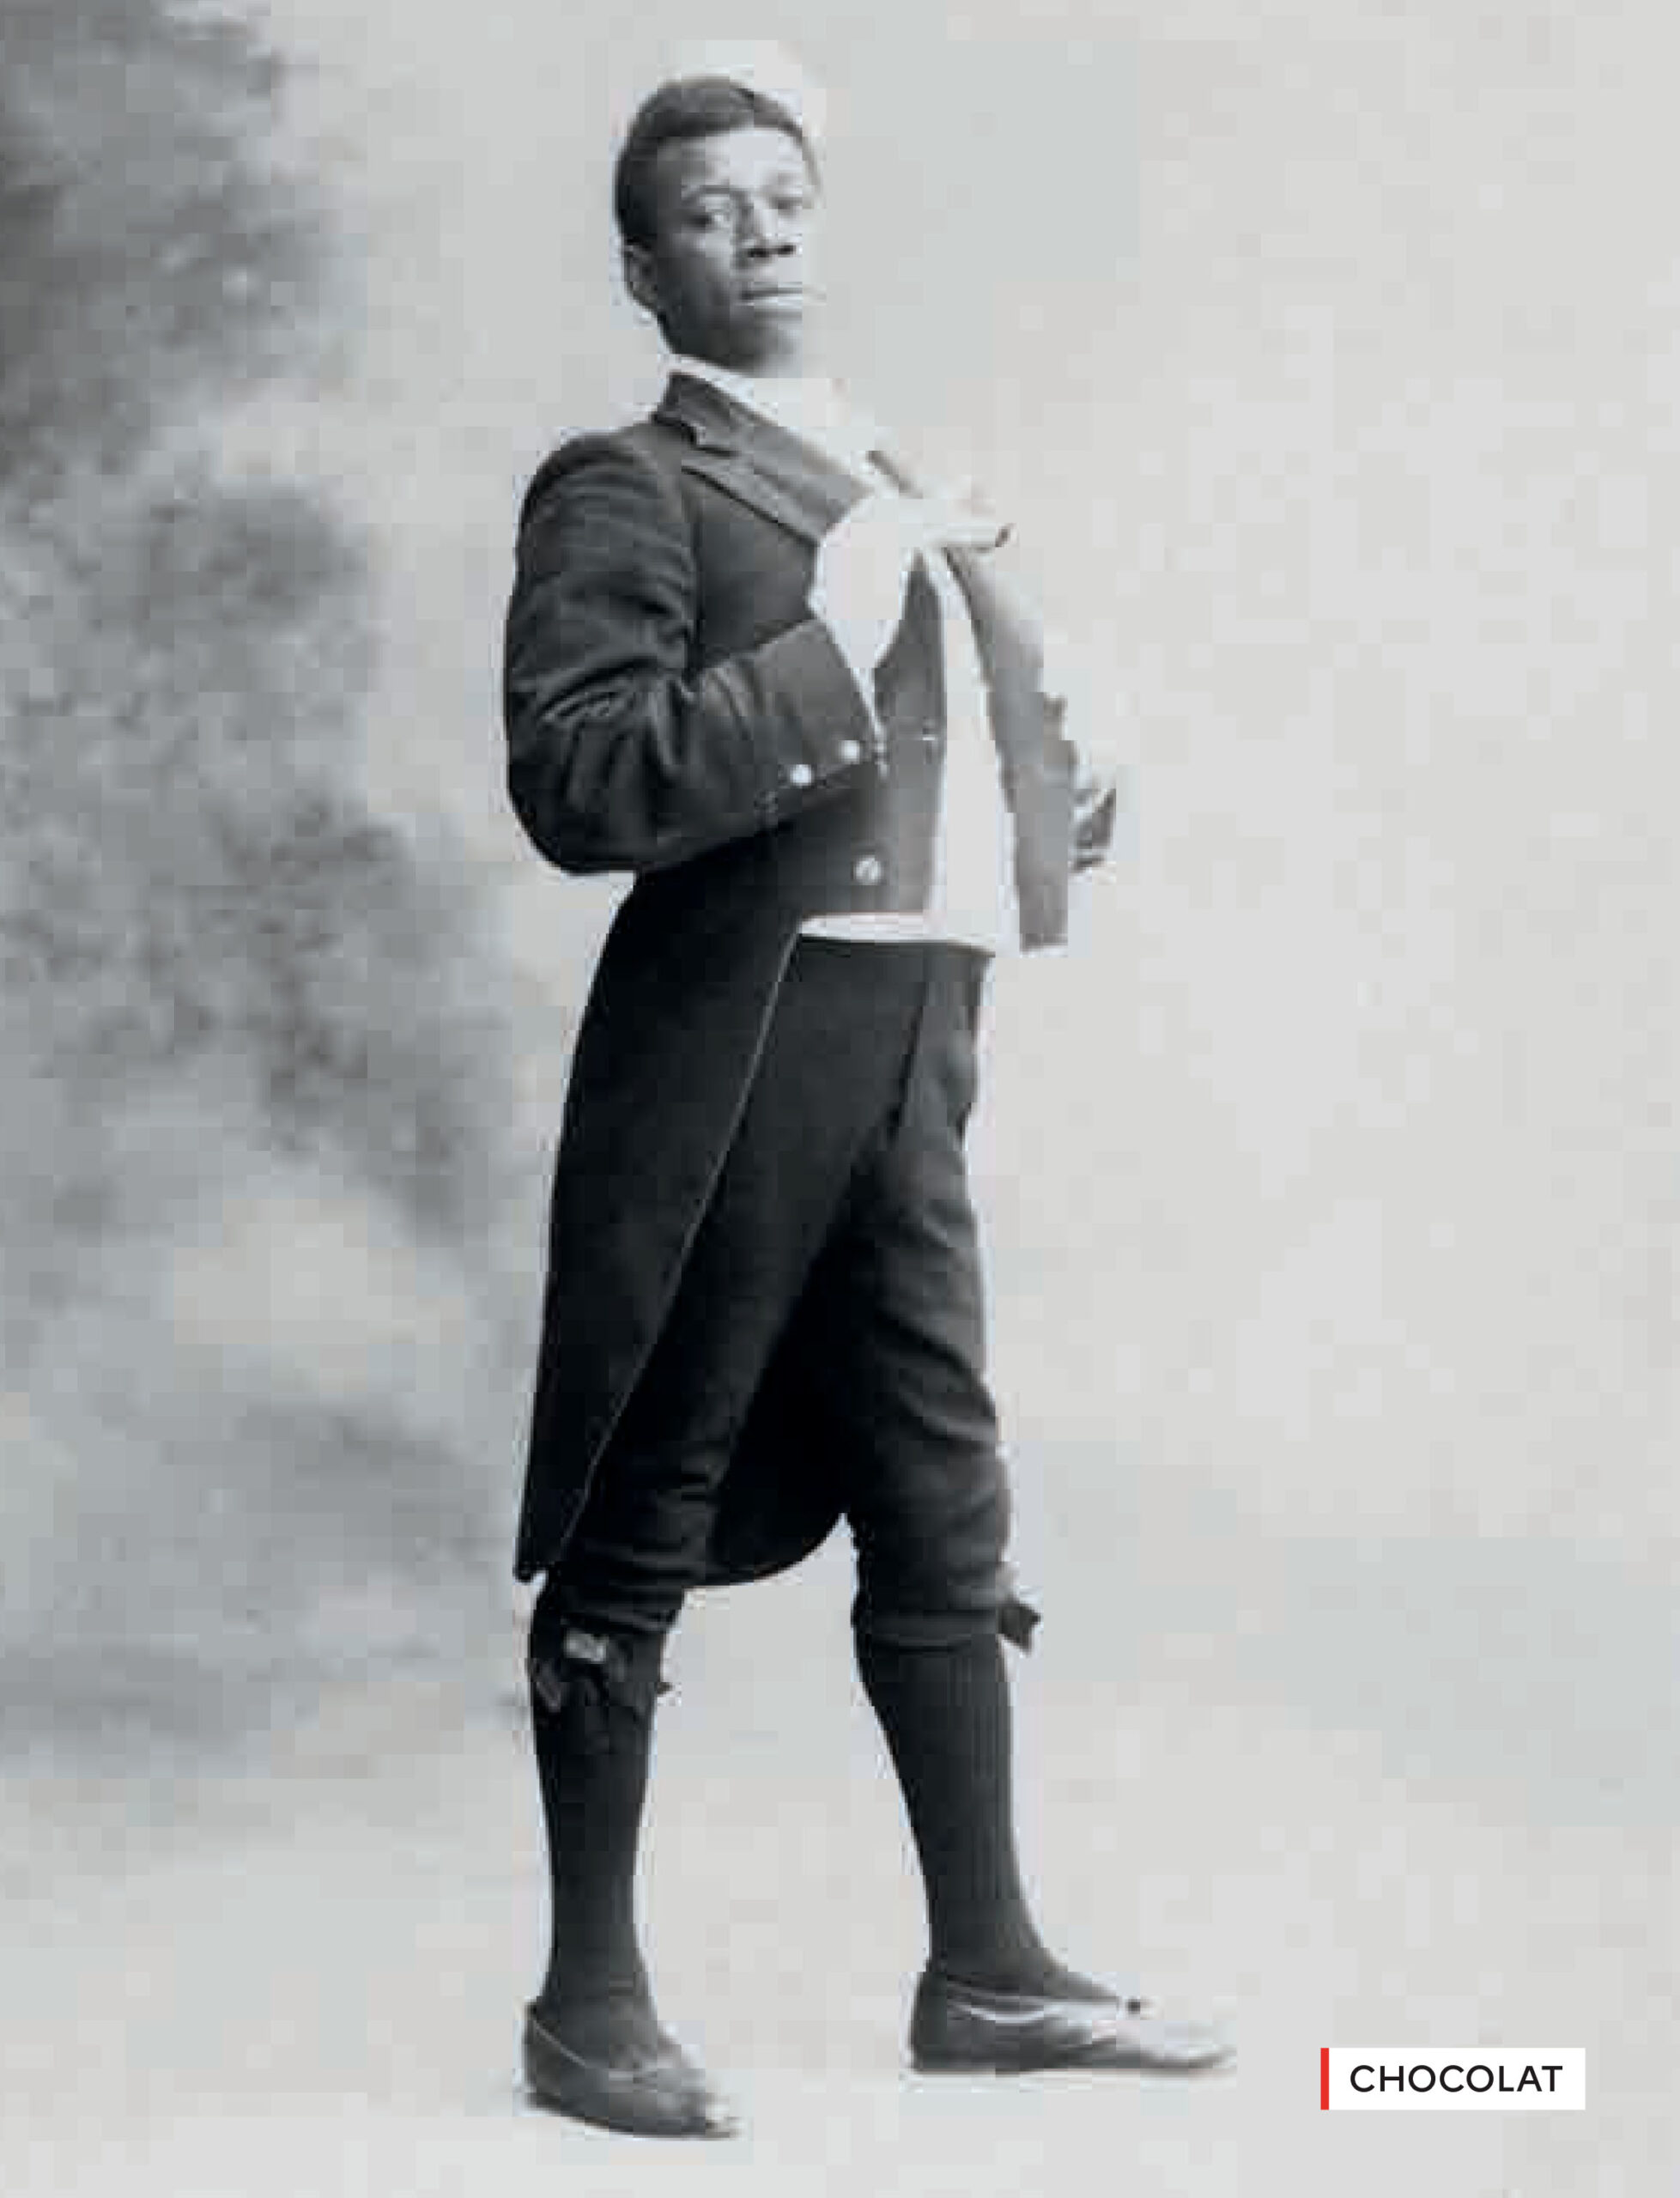 Cuban pantomime actor Rafael Padilla (1867-1917), known by his artist name Chocolat, who was born a slave and ended his life in misery.